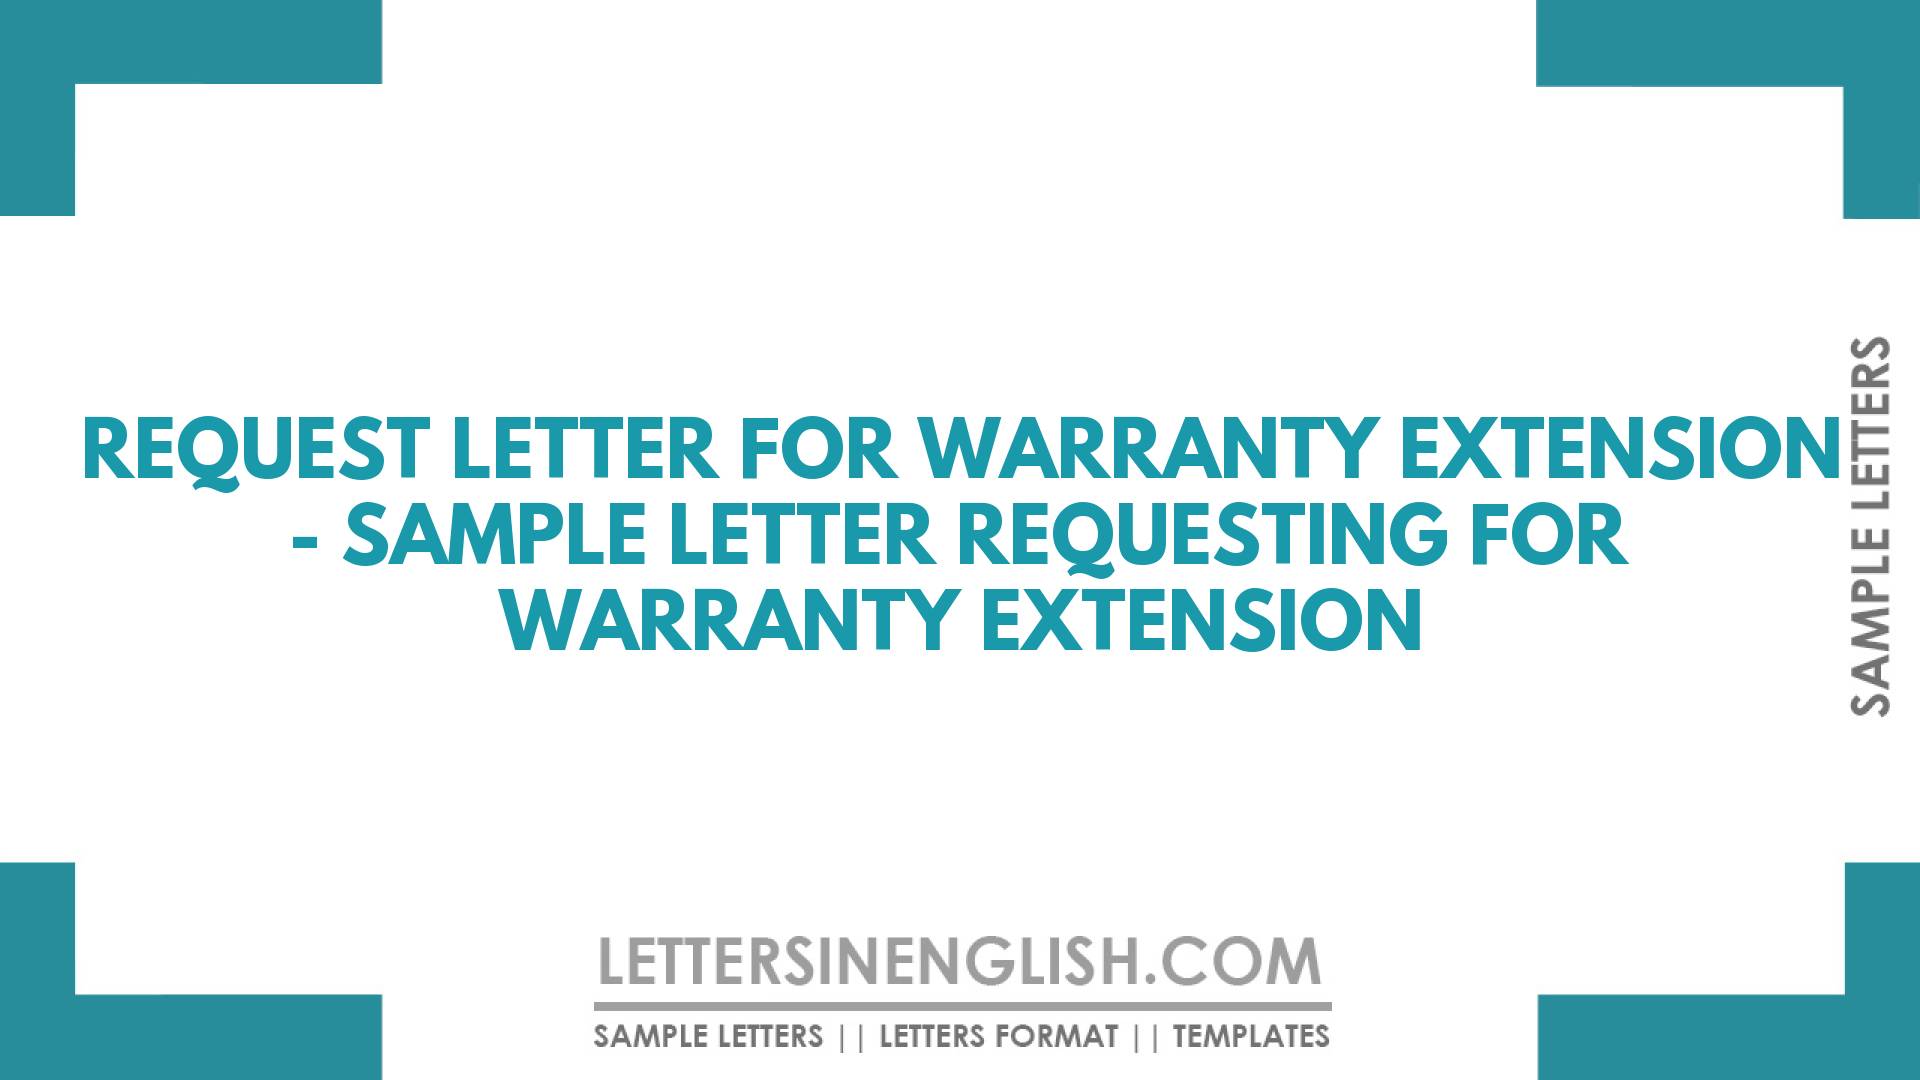 Request Letter for Warranty Extension – Sample Letter Requesting for Warranty Extension